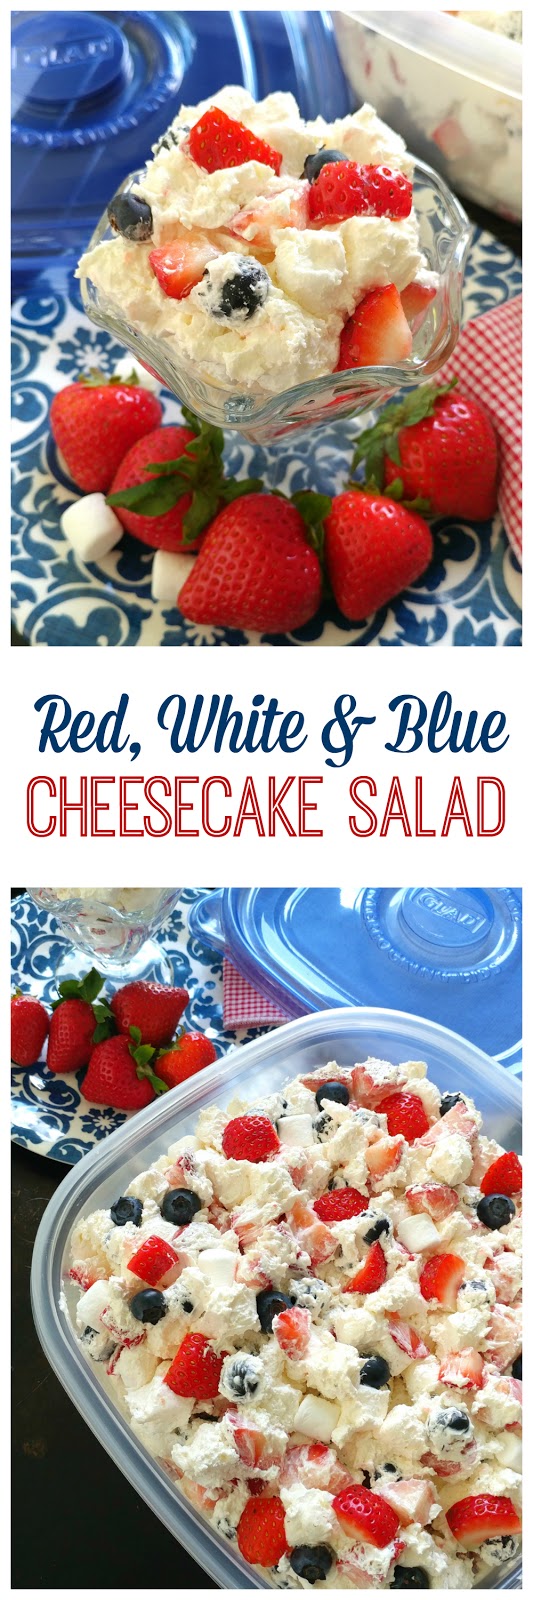 Red, White & Blue Cheesecake Salad! This berry cheesecake dessert is perfect for Memorial Day and 4th of July with strawberries, blueberries and cream cheese filling.